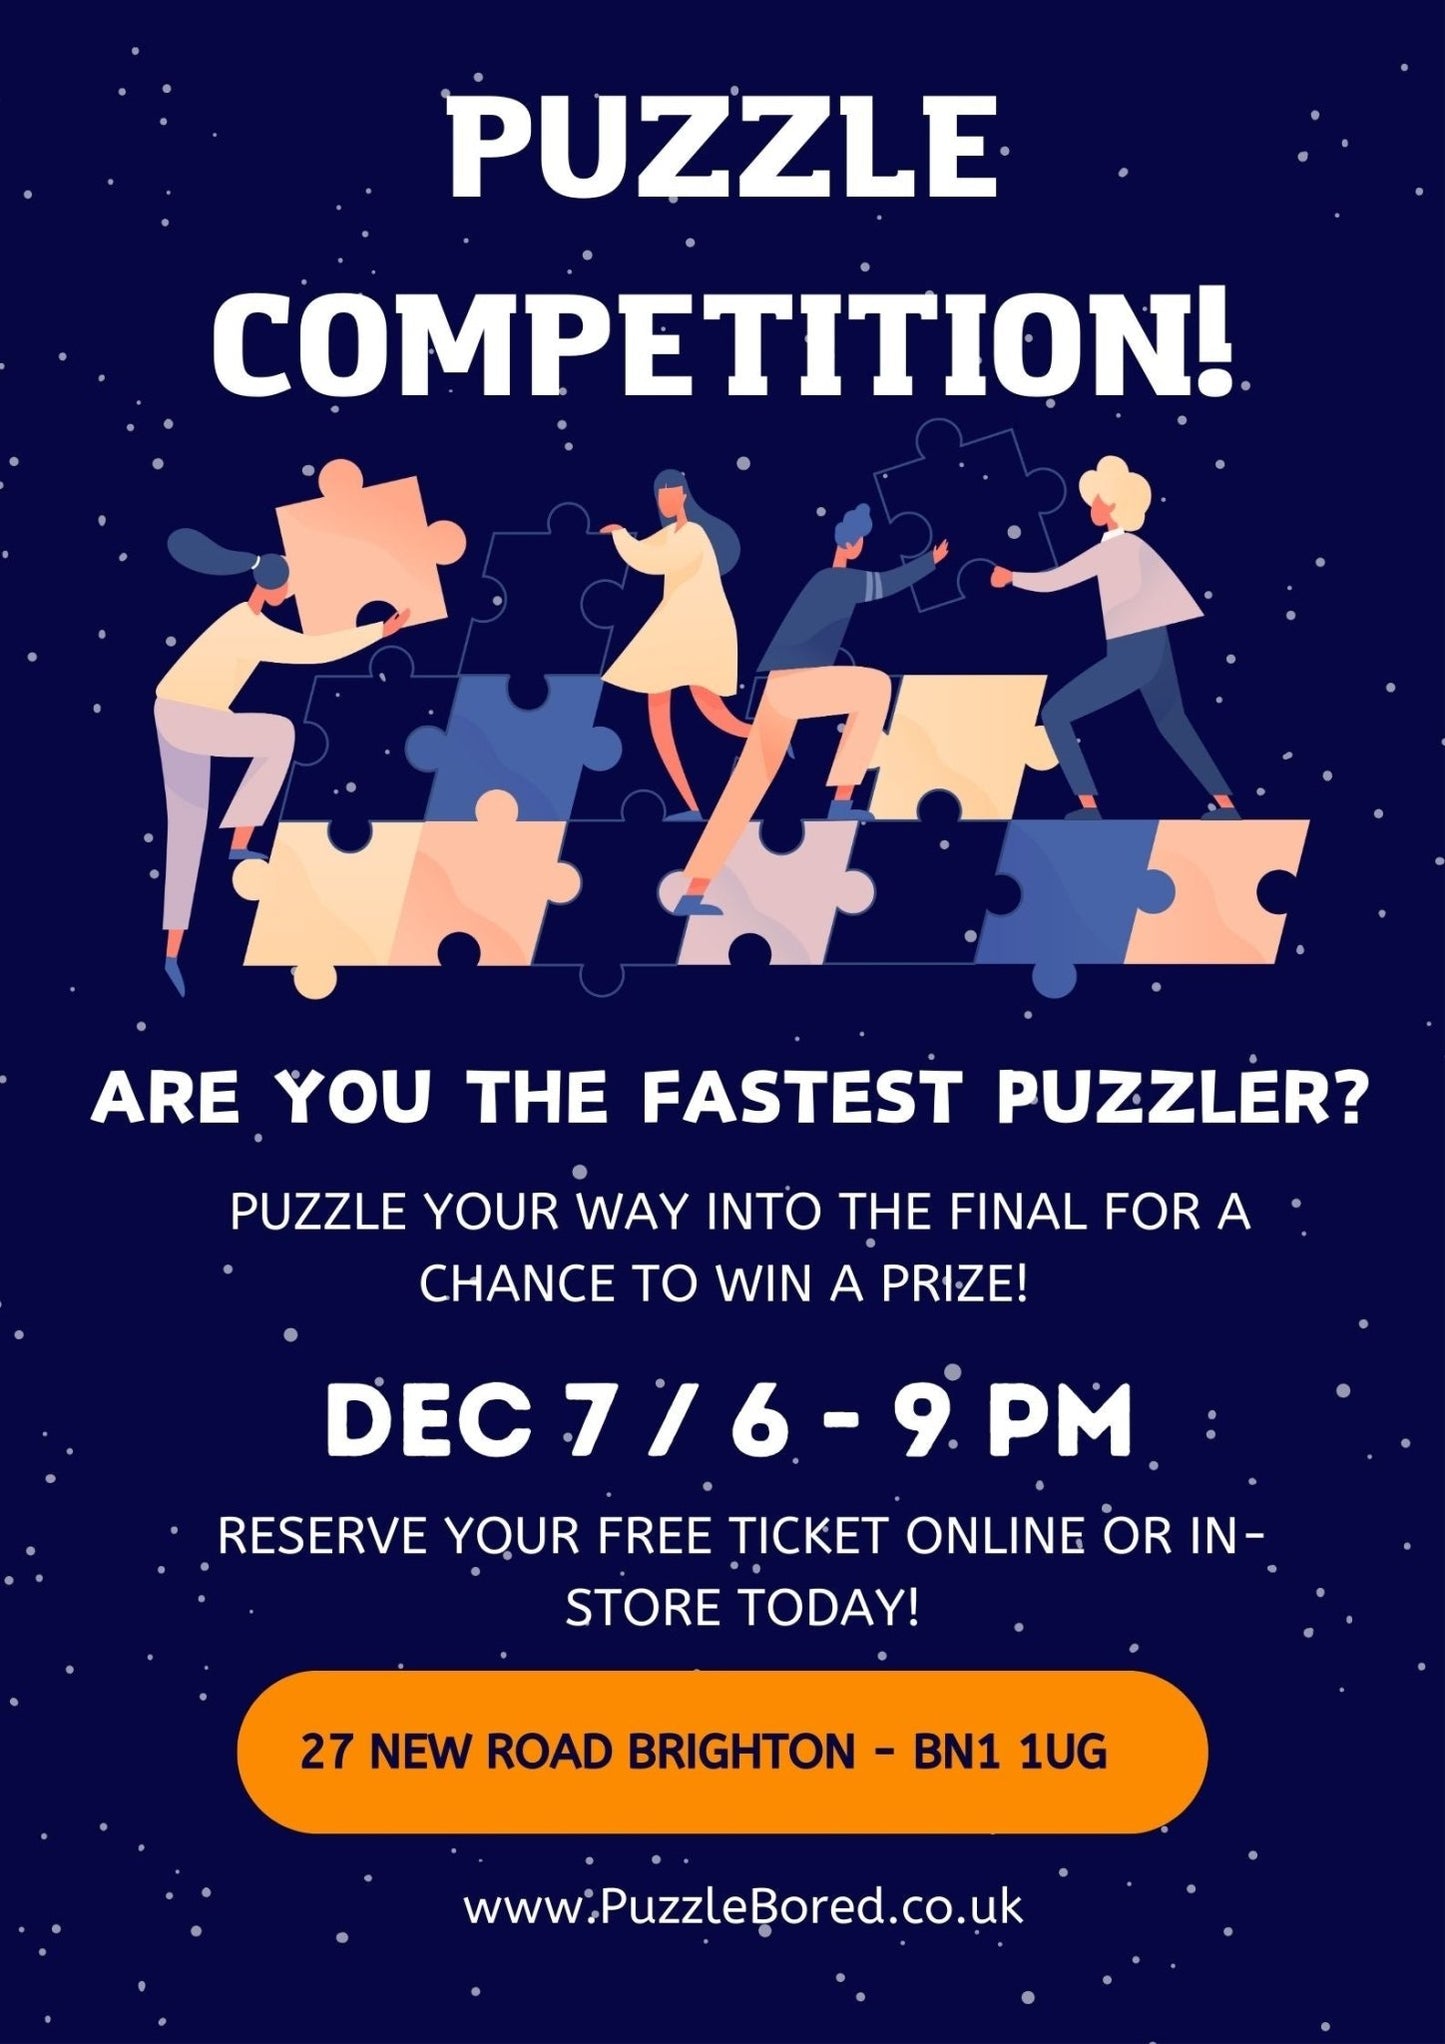 Puzzle competition - ticket reservation - Puzzle Bored